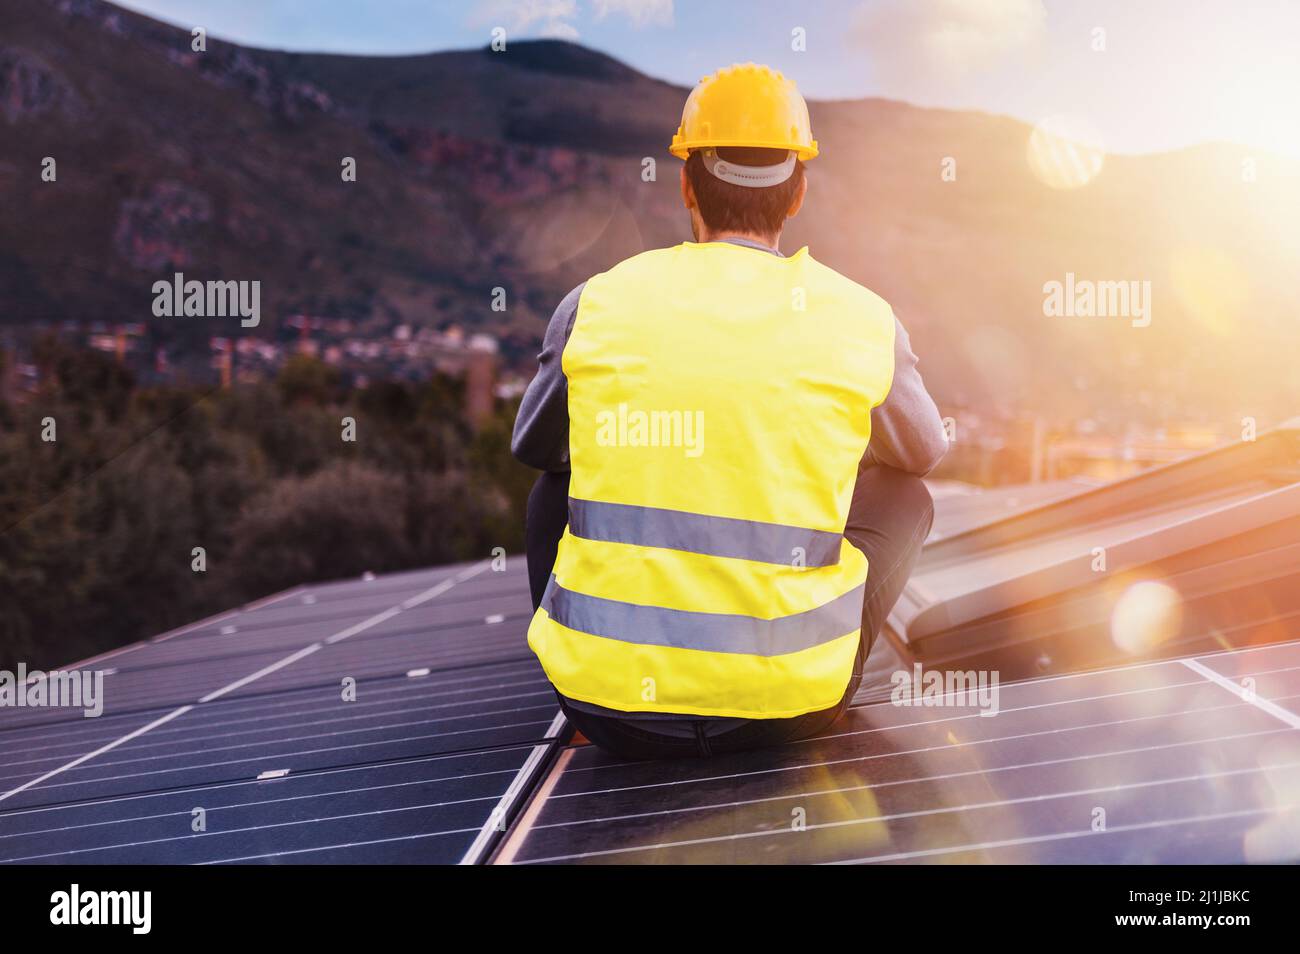 Workers takes a break above solar panel for electricity Stock Photo